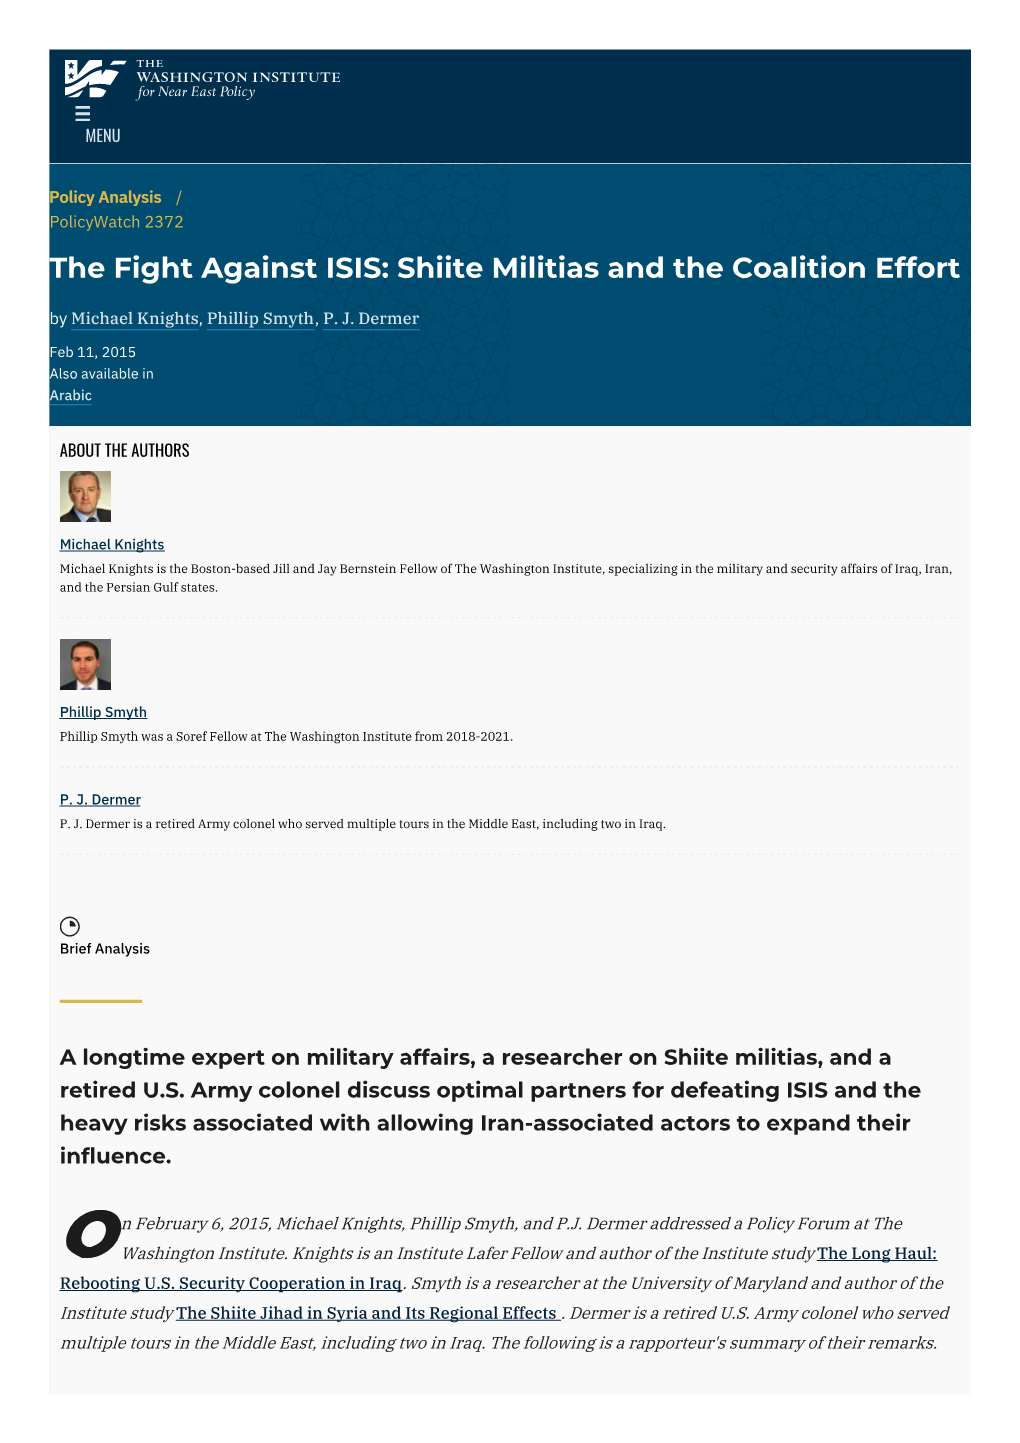 The Fight Against ISIS: Shiite Militias and the Coalition Effort by Michael Knights, Phillip Smyth, P